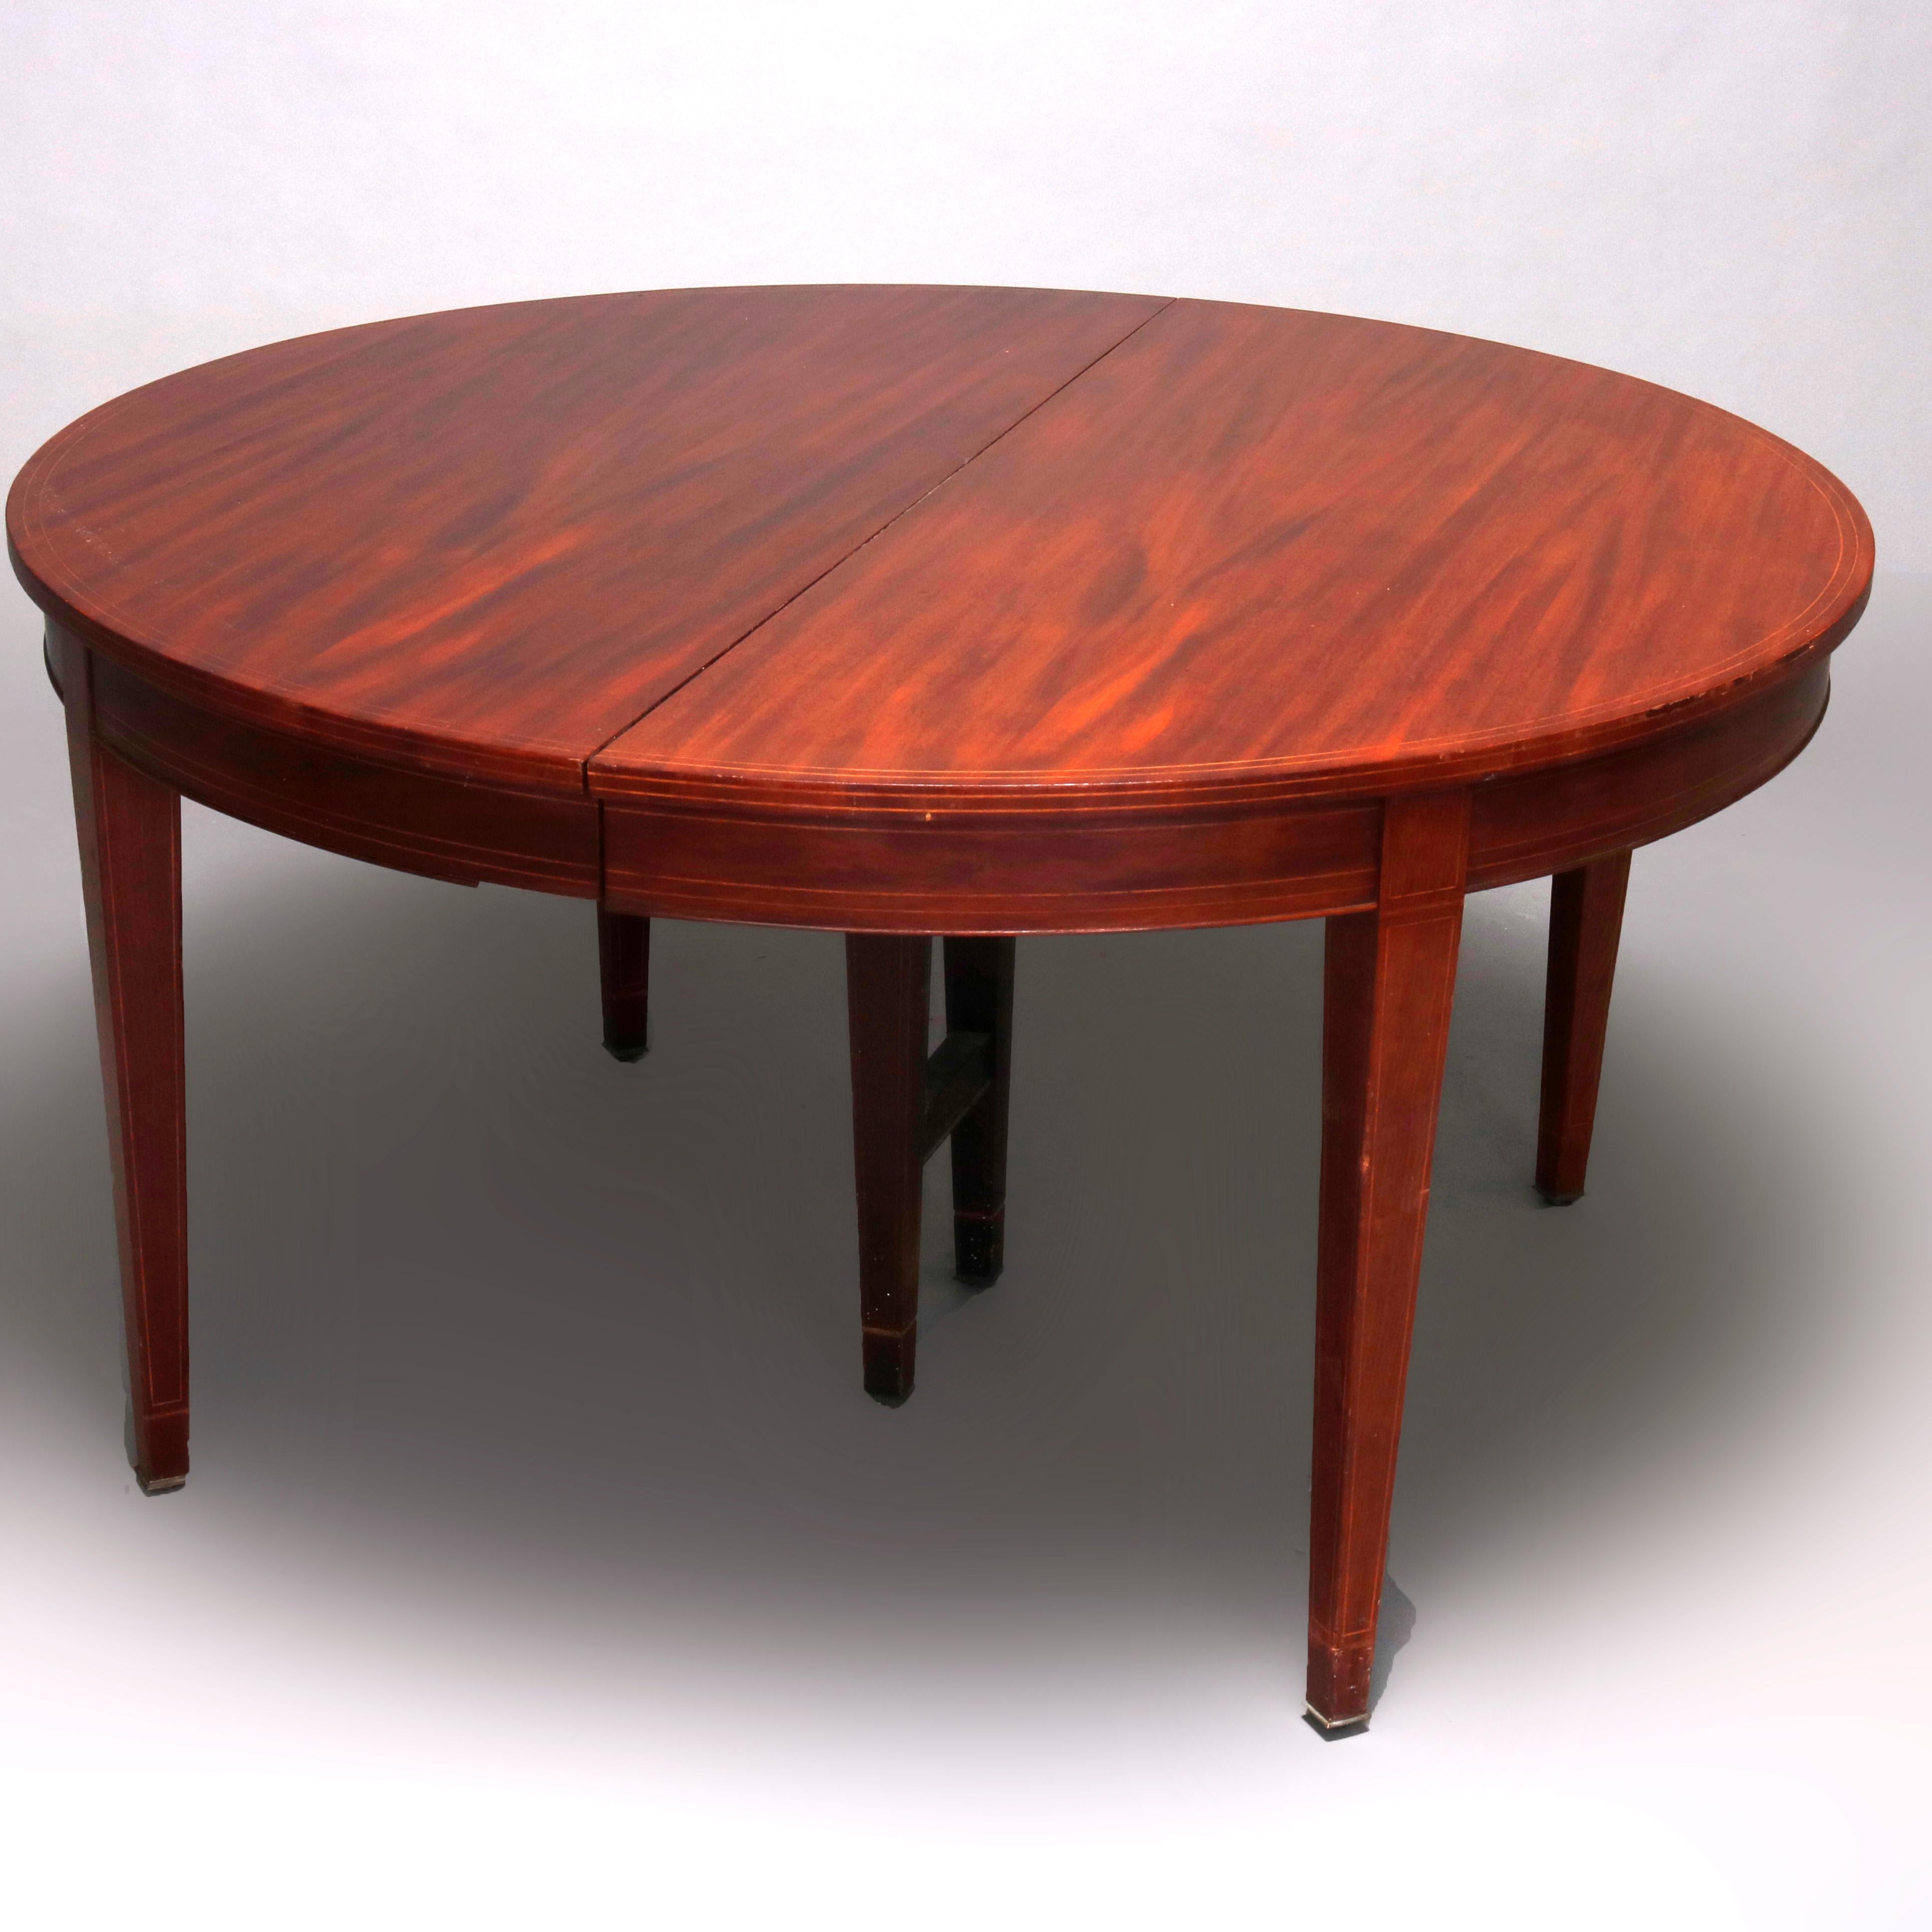 A vintage Hepplewhite style extension banquet table offers oval form in mahogany construction with satinwood banding and raised on square and tapered legs, with six leaves, c1930

***DELIVERY NOTICE – Due to COVID-19 we are employing NO-CONTACT